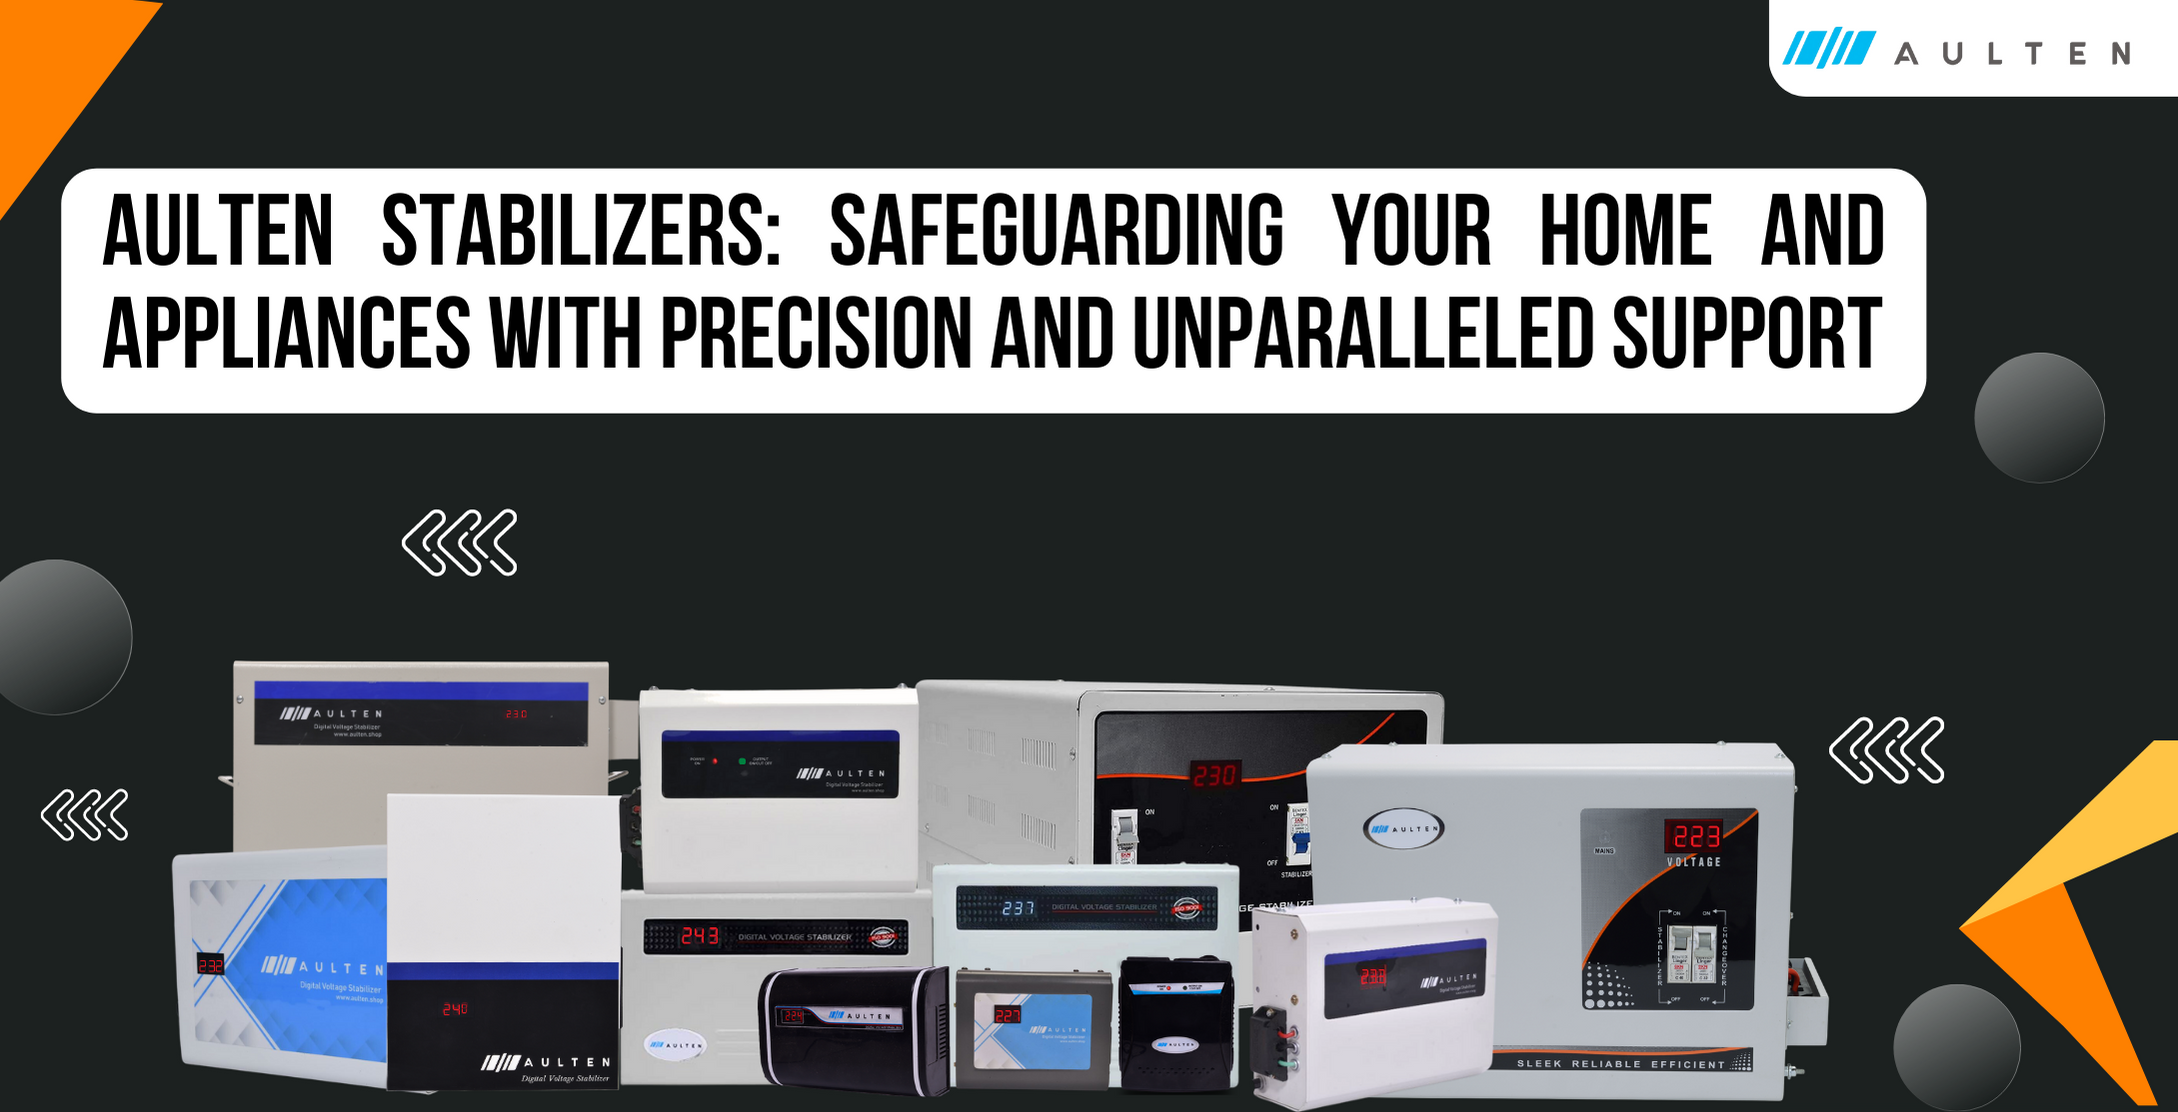 Aulten Stabilizers: Safeguarding Your Home and Appliances with Precision and Unparalleled Support